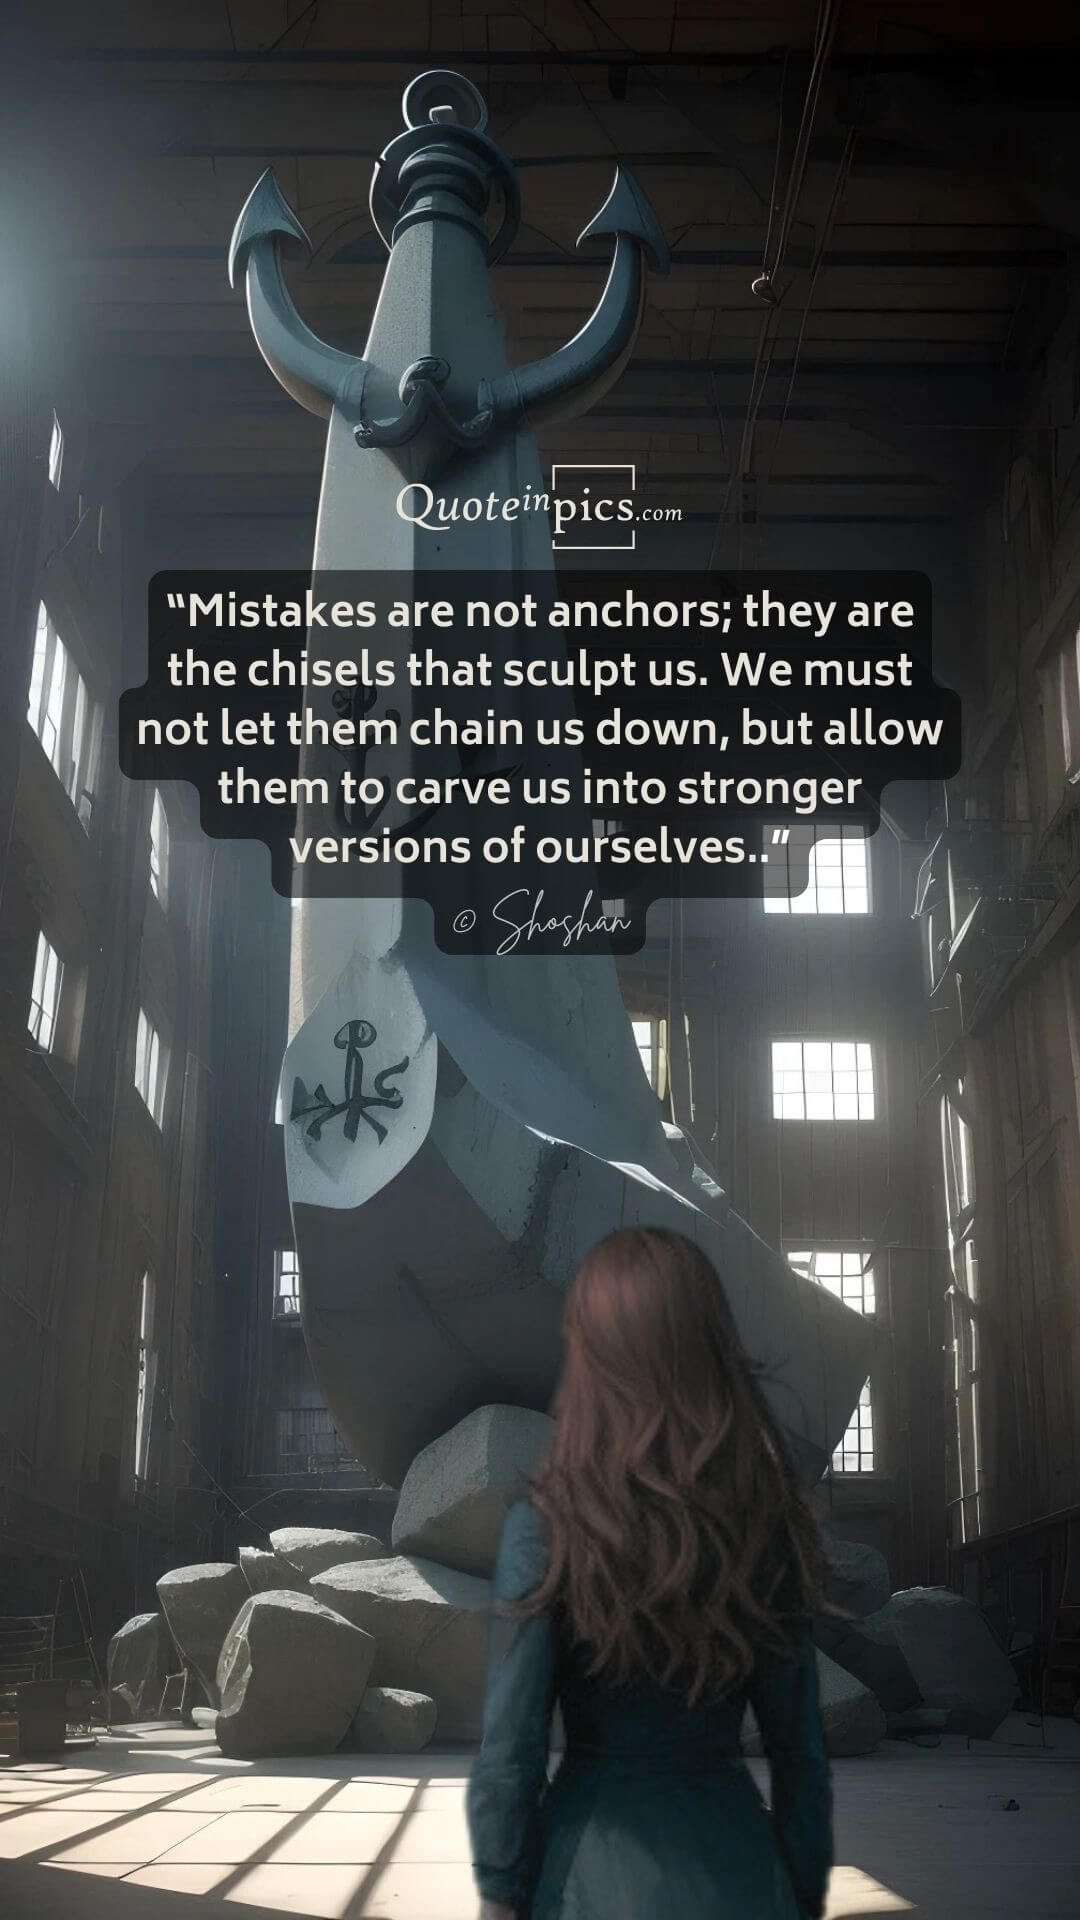 Mistakes are not anchors; they are the chisels that sculpt us.